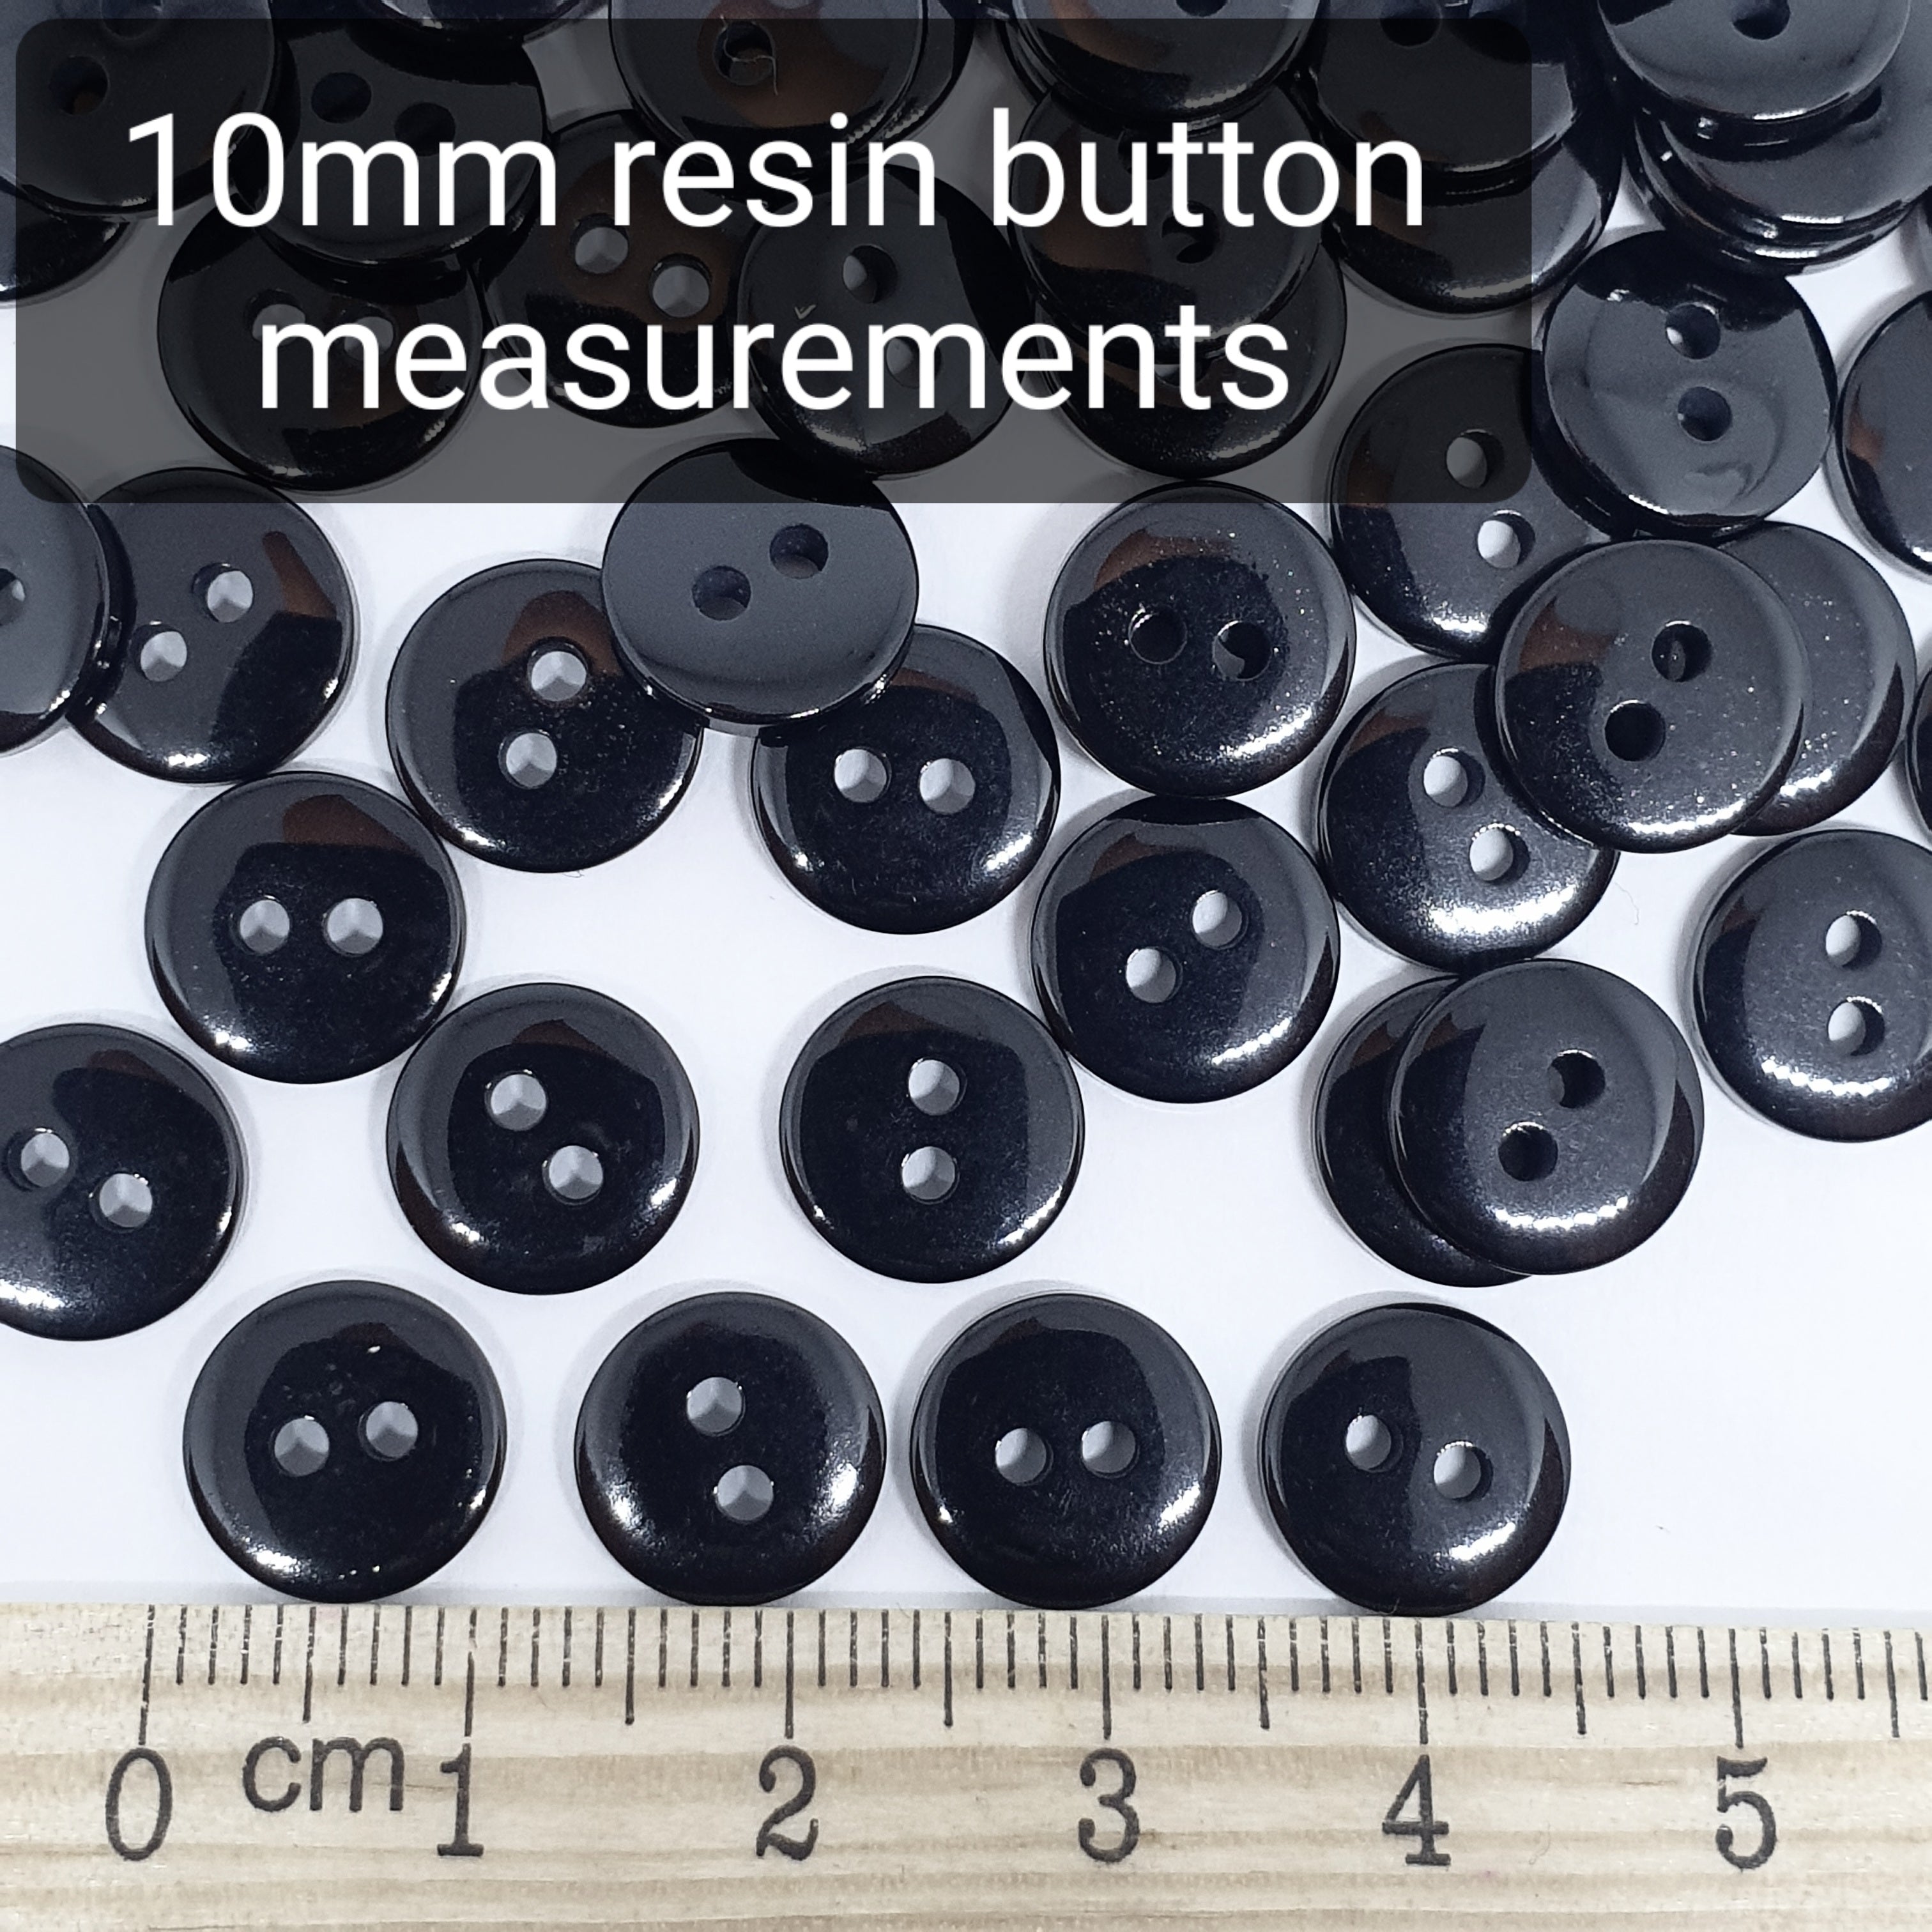 MajorCrafts 120pcs 10mm Light Purple 2 Holes Small Round Resin Sewing Buttons B13